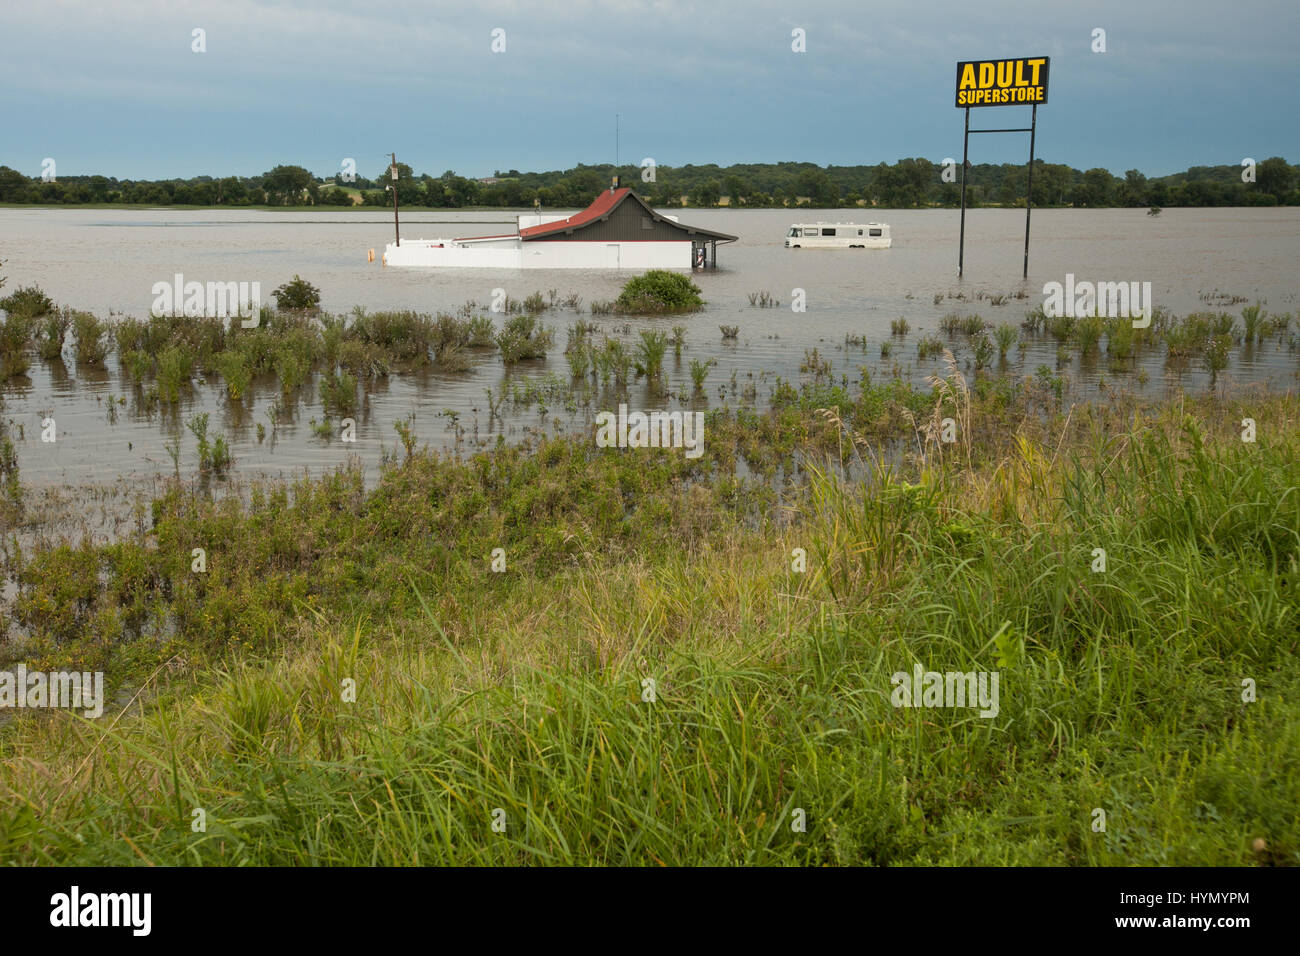 A recreational vehicle and an adult superstore are submerged in flood waters. Stock Photo